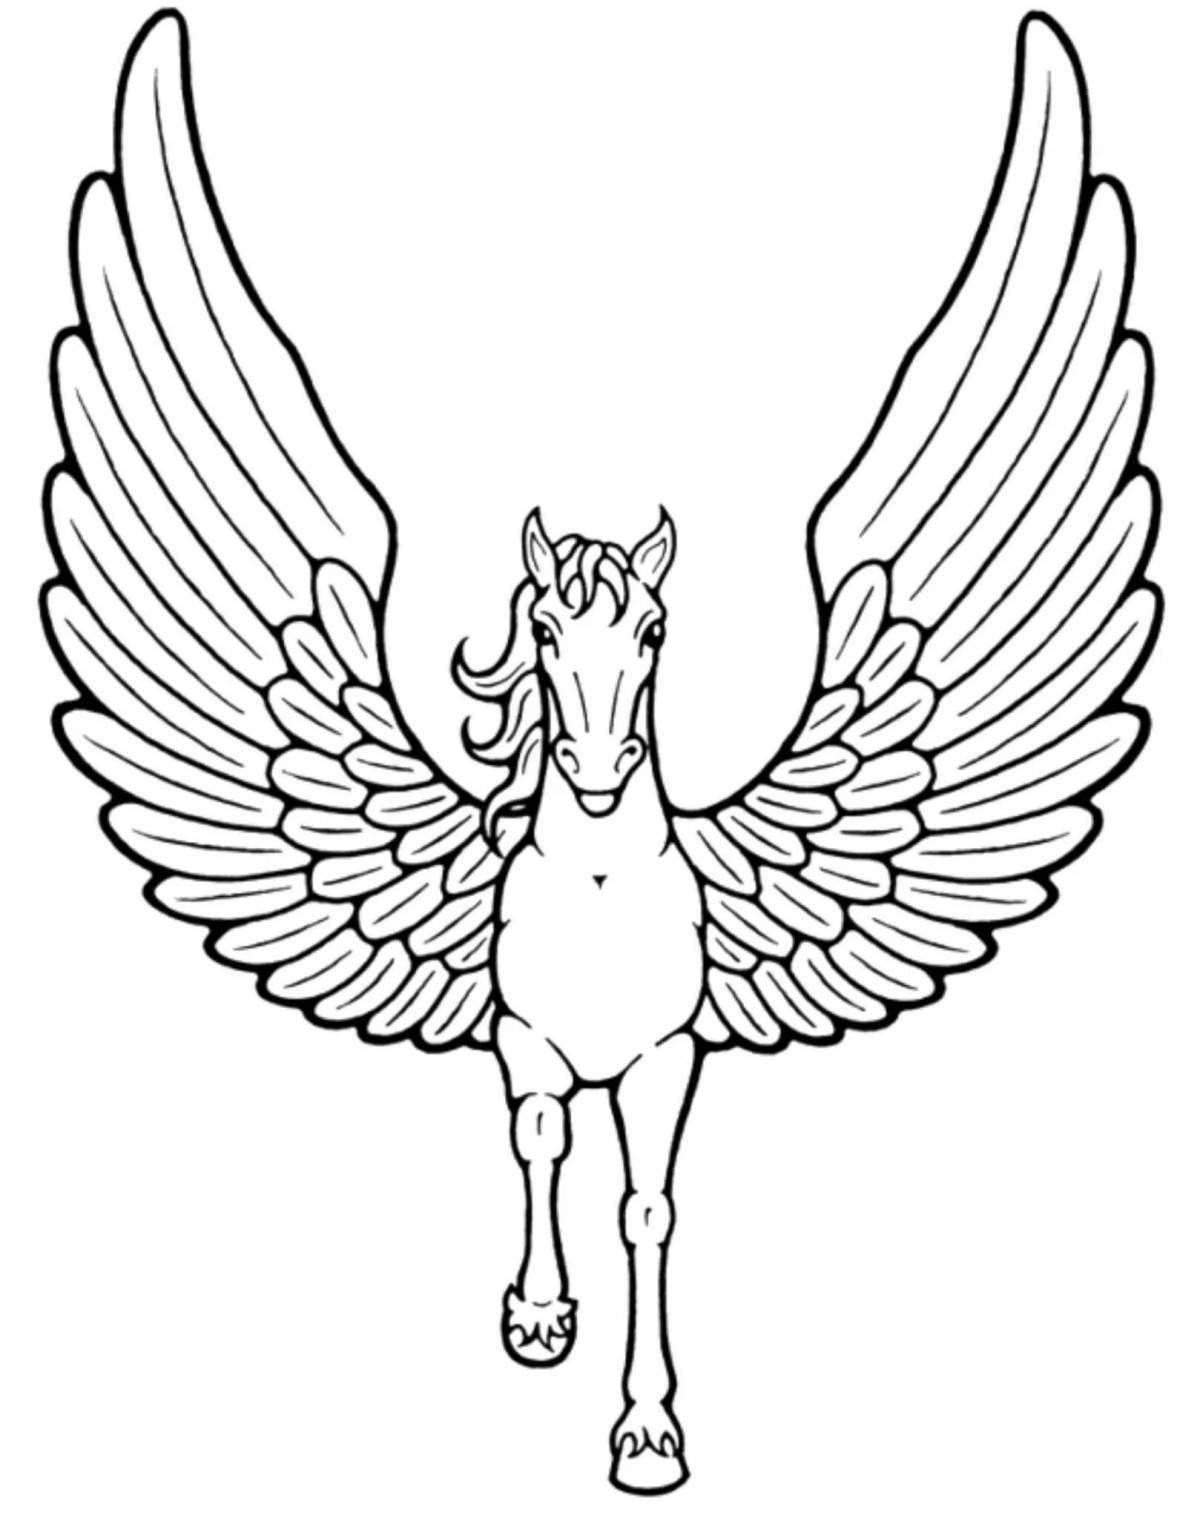 Horse with wings #6